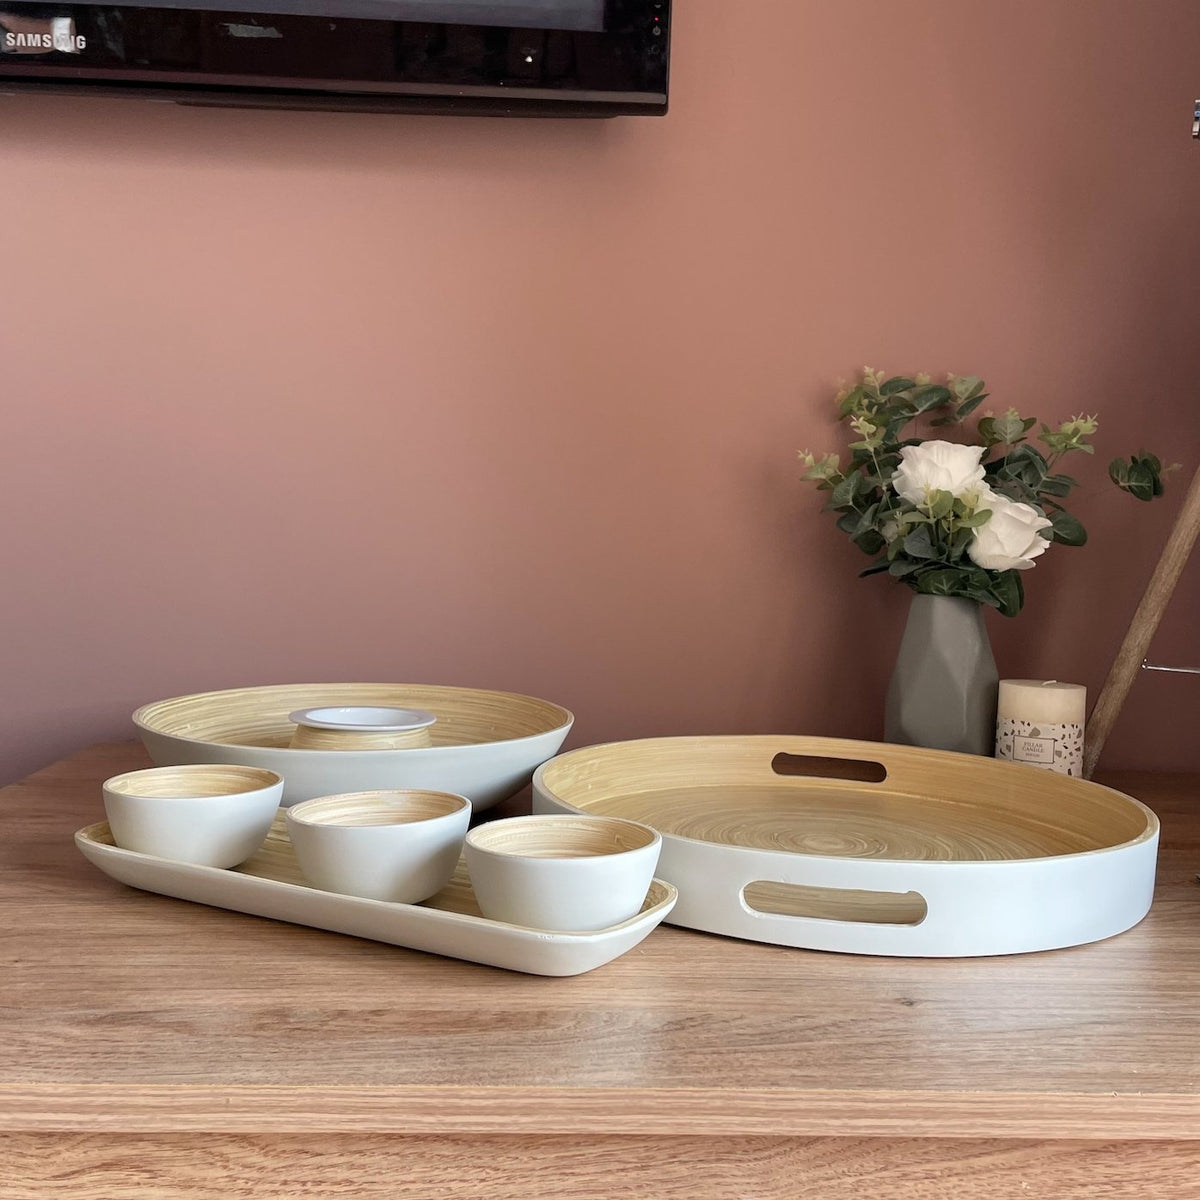 Bamboo Chip 'n' Dip bowl collection of serving trays and snack bowls on a table with a grey vase plant and a pillar candle